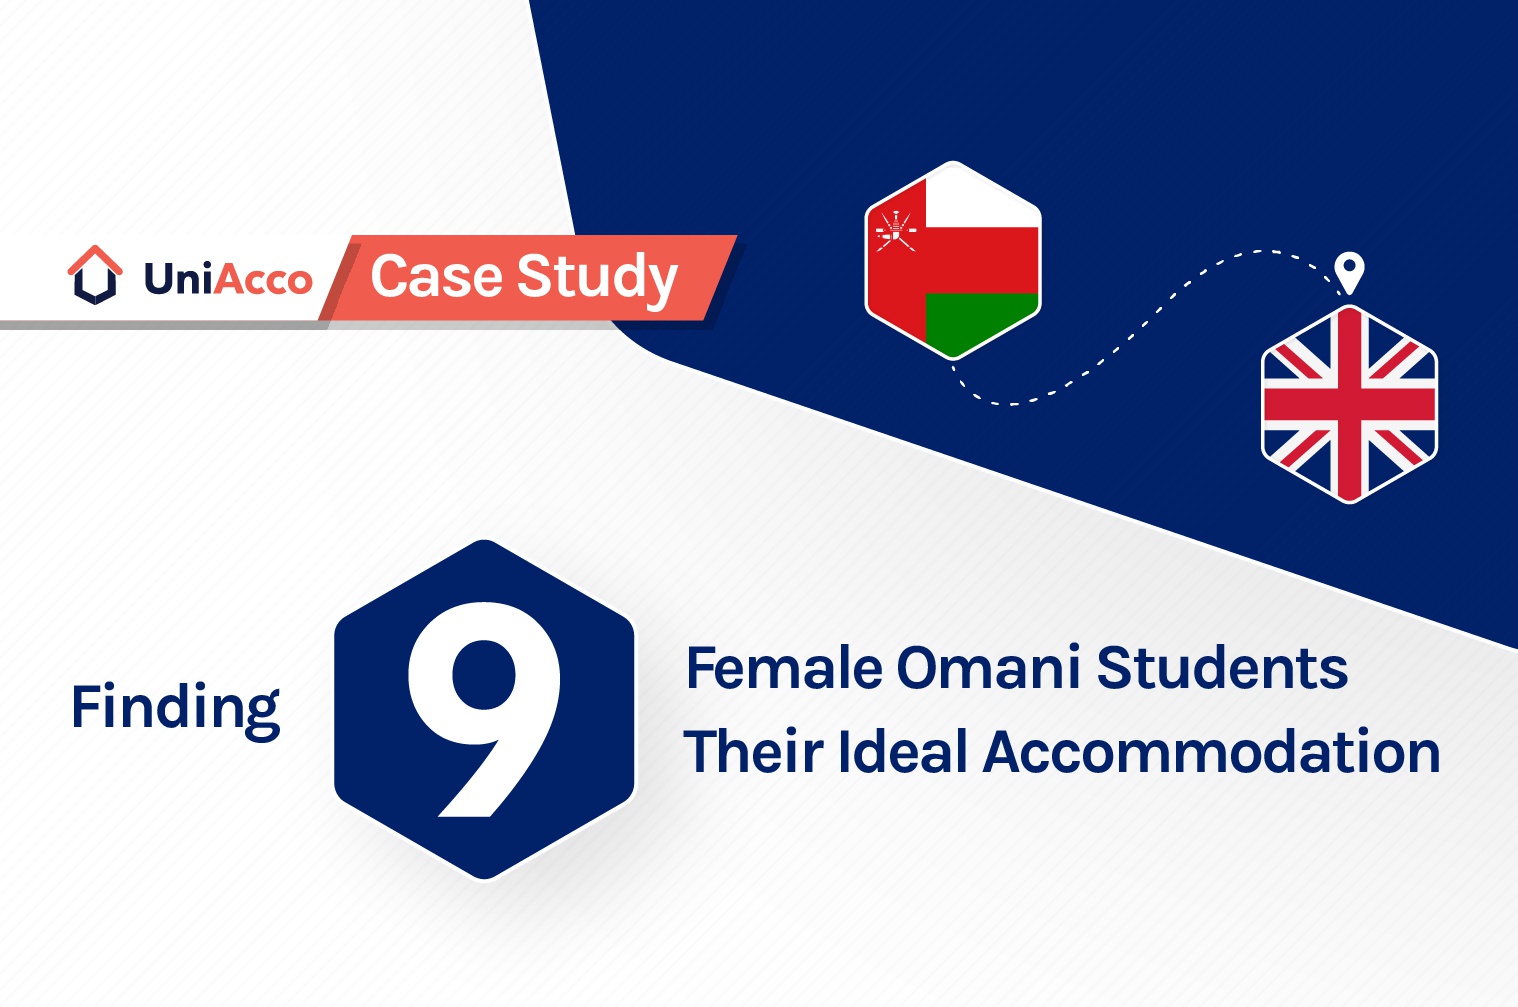 Case Study – Finding 9 Female Omani Students Their Ideal Accommodation